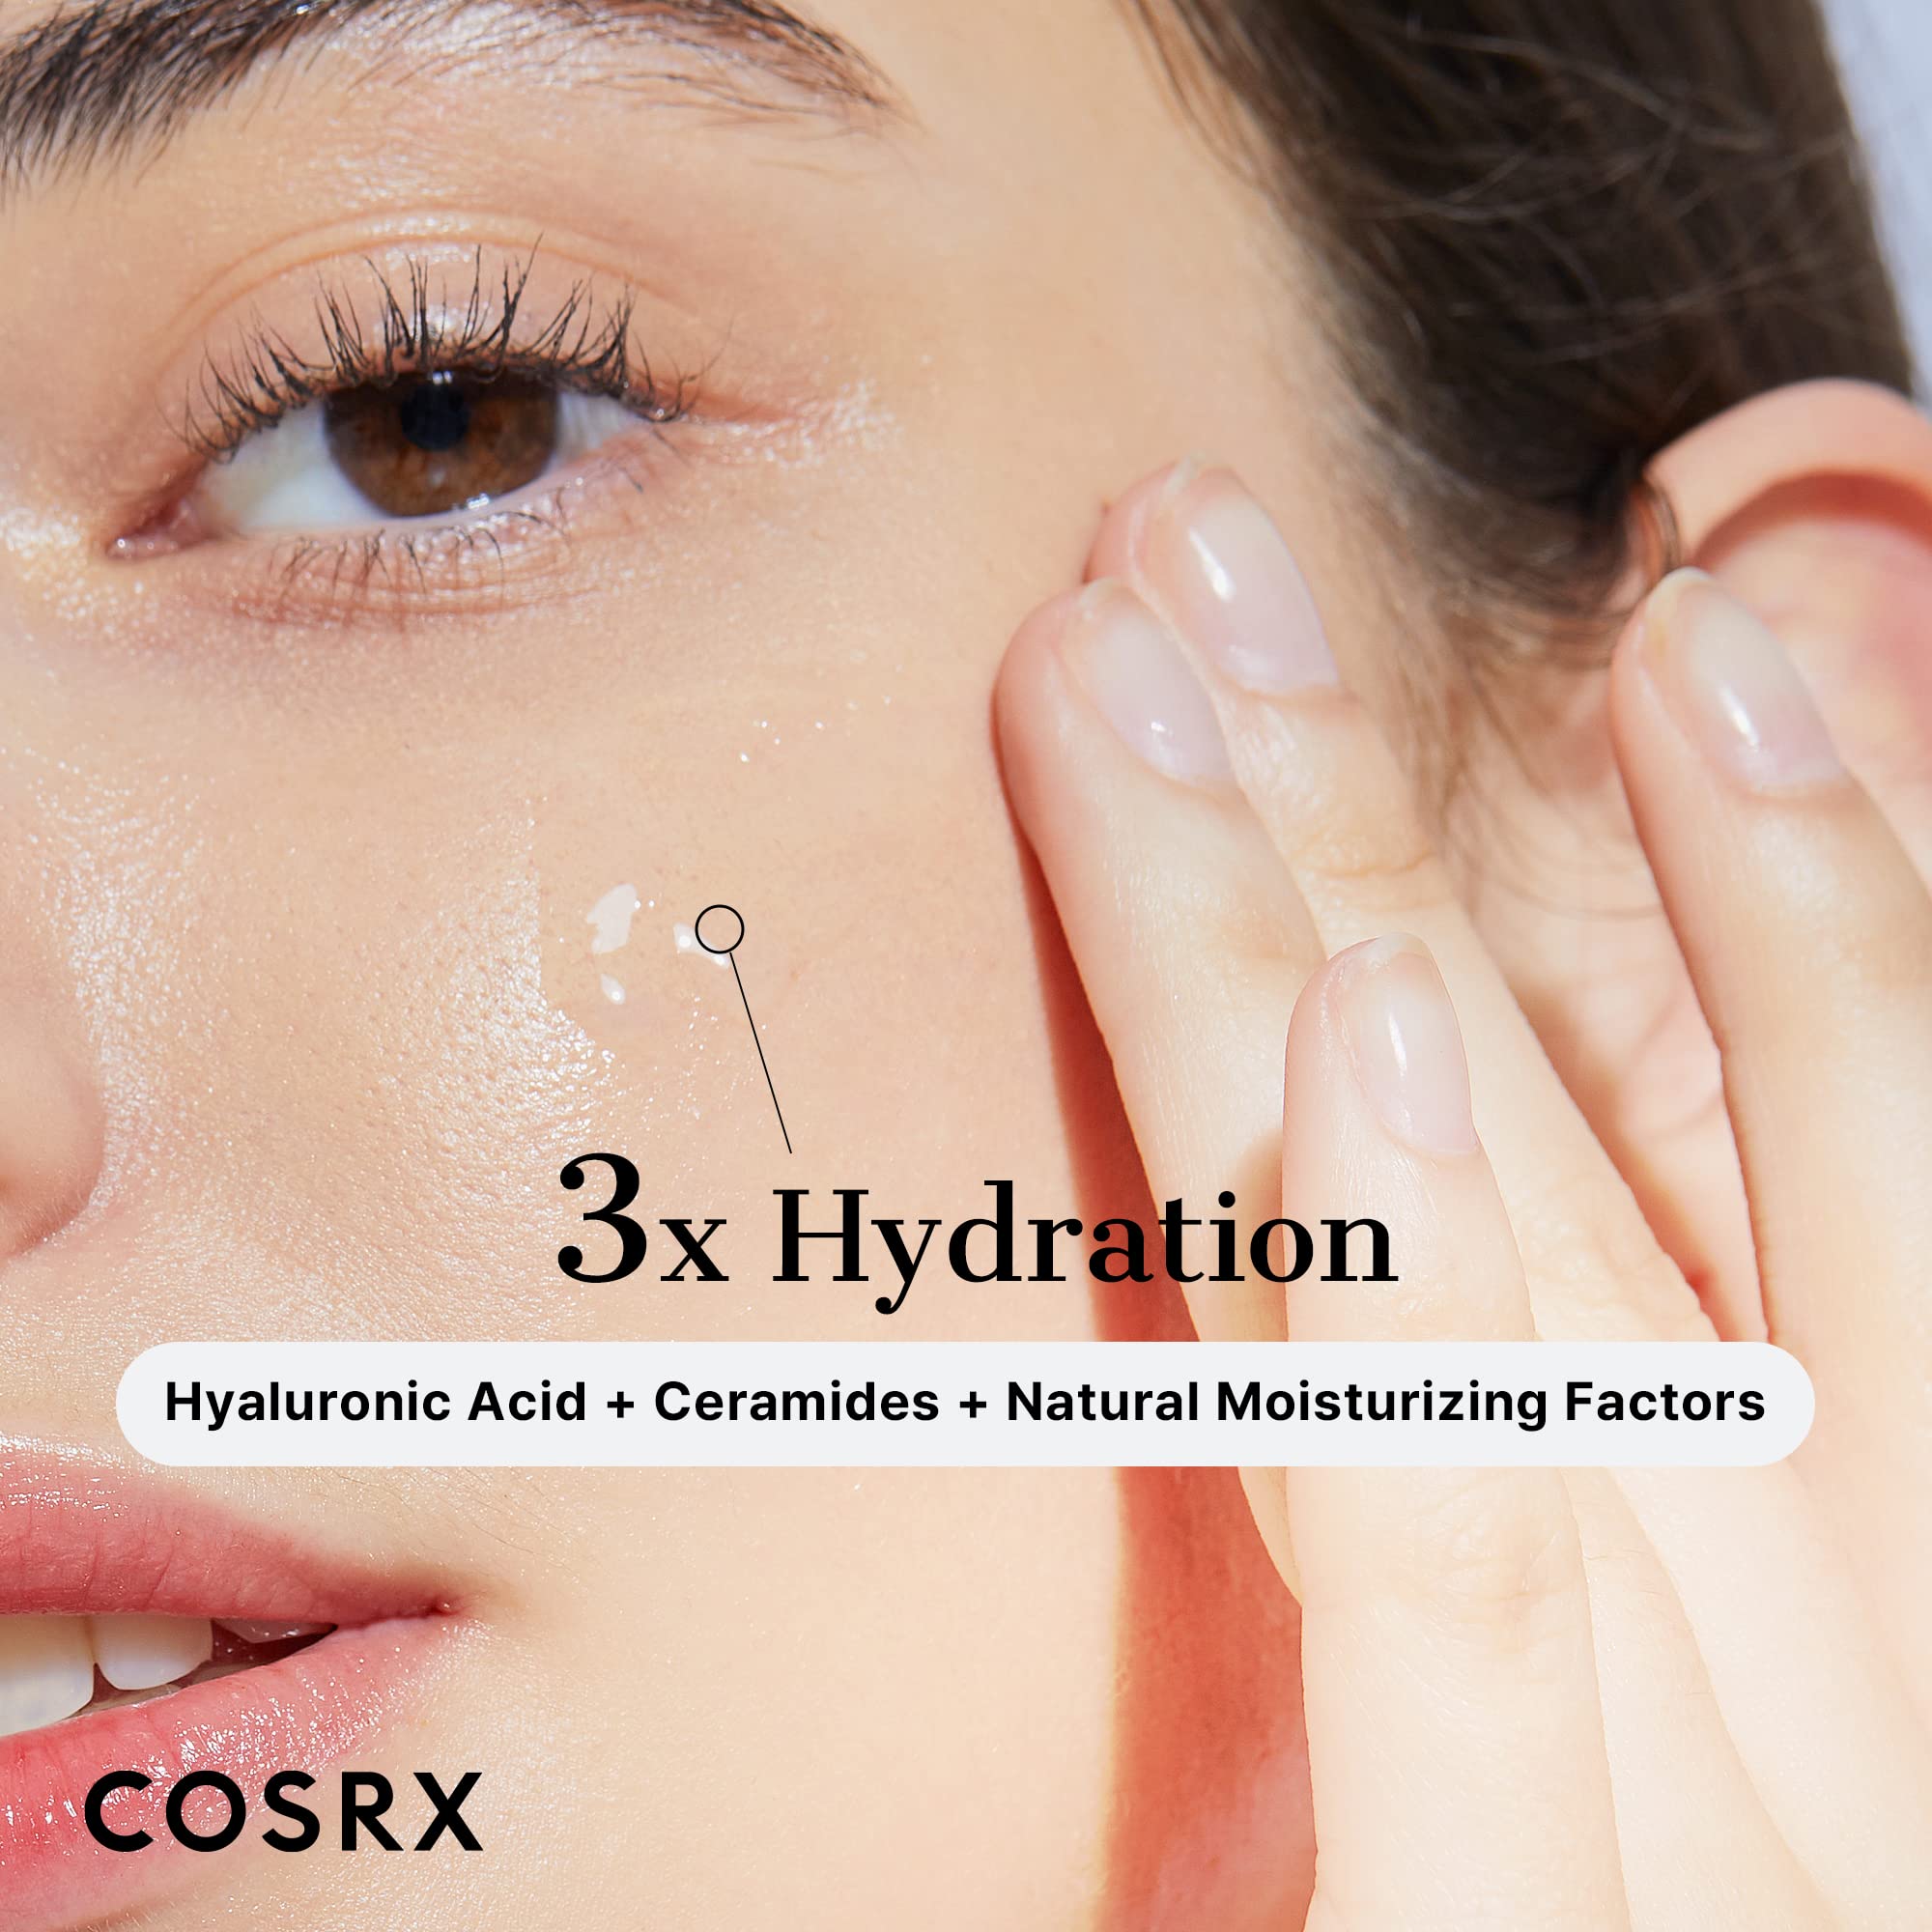 COSRX Hyaluronic Acid Hydrating Duo- Hyaluronic Acid Intensive Cream + Hyaluronic Acid 3% Serum, Deep Hydration, Retain Moisture, Easy and Daily Skincare, Korean SKincare